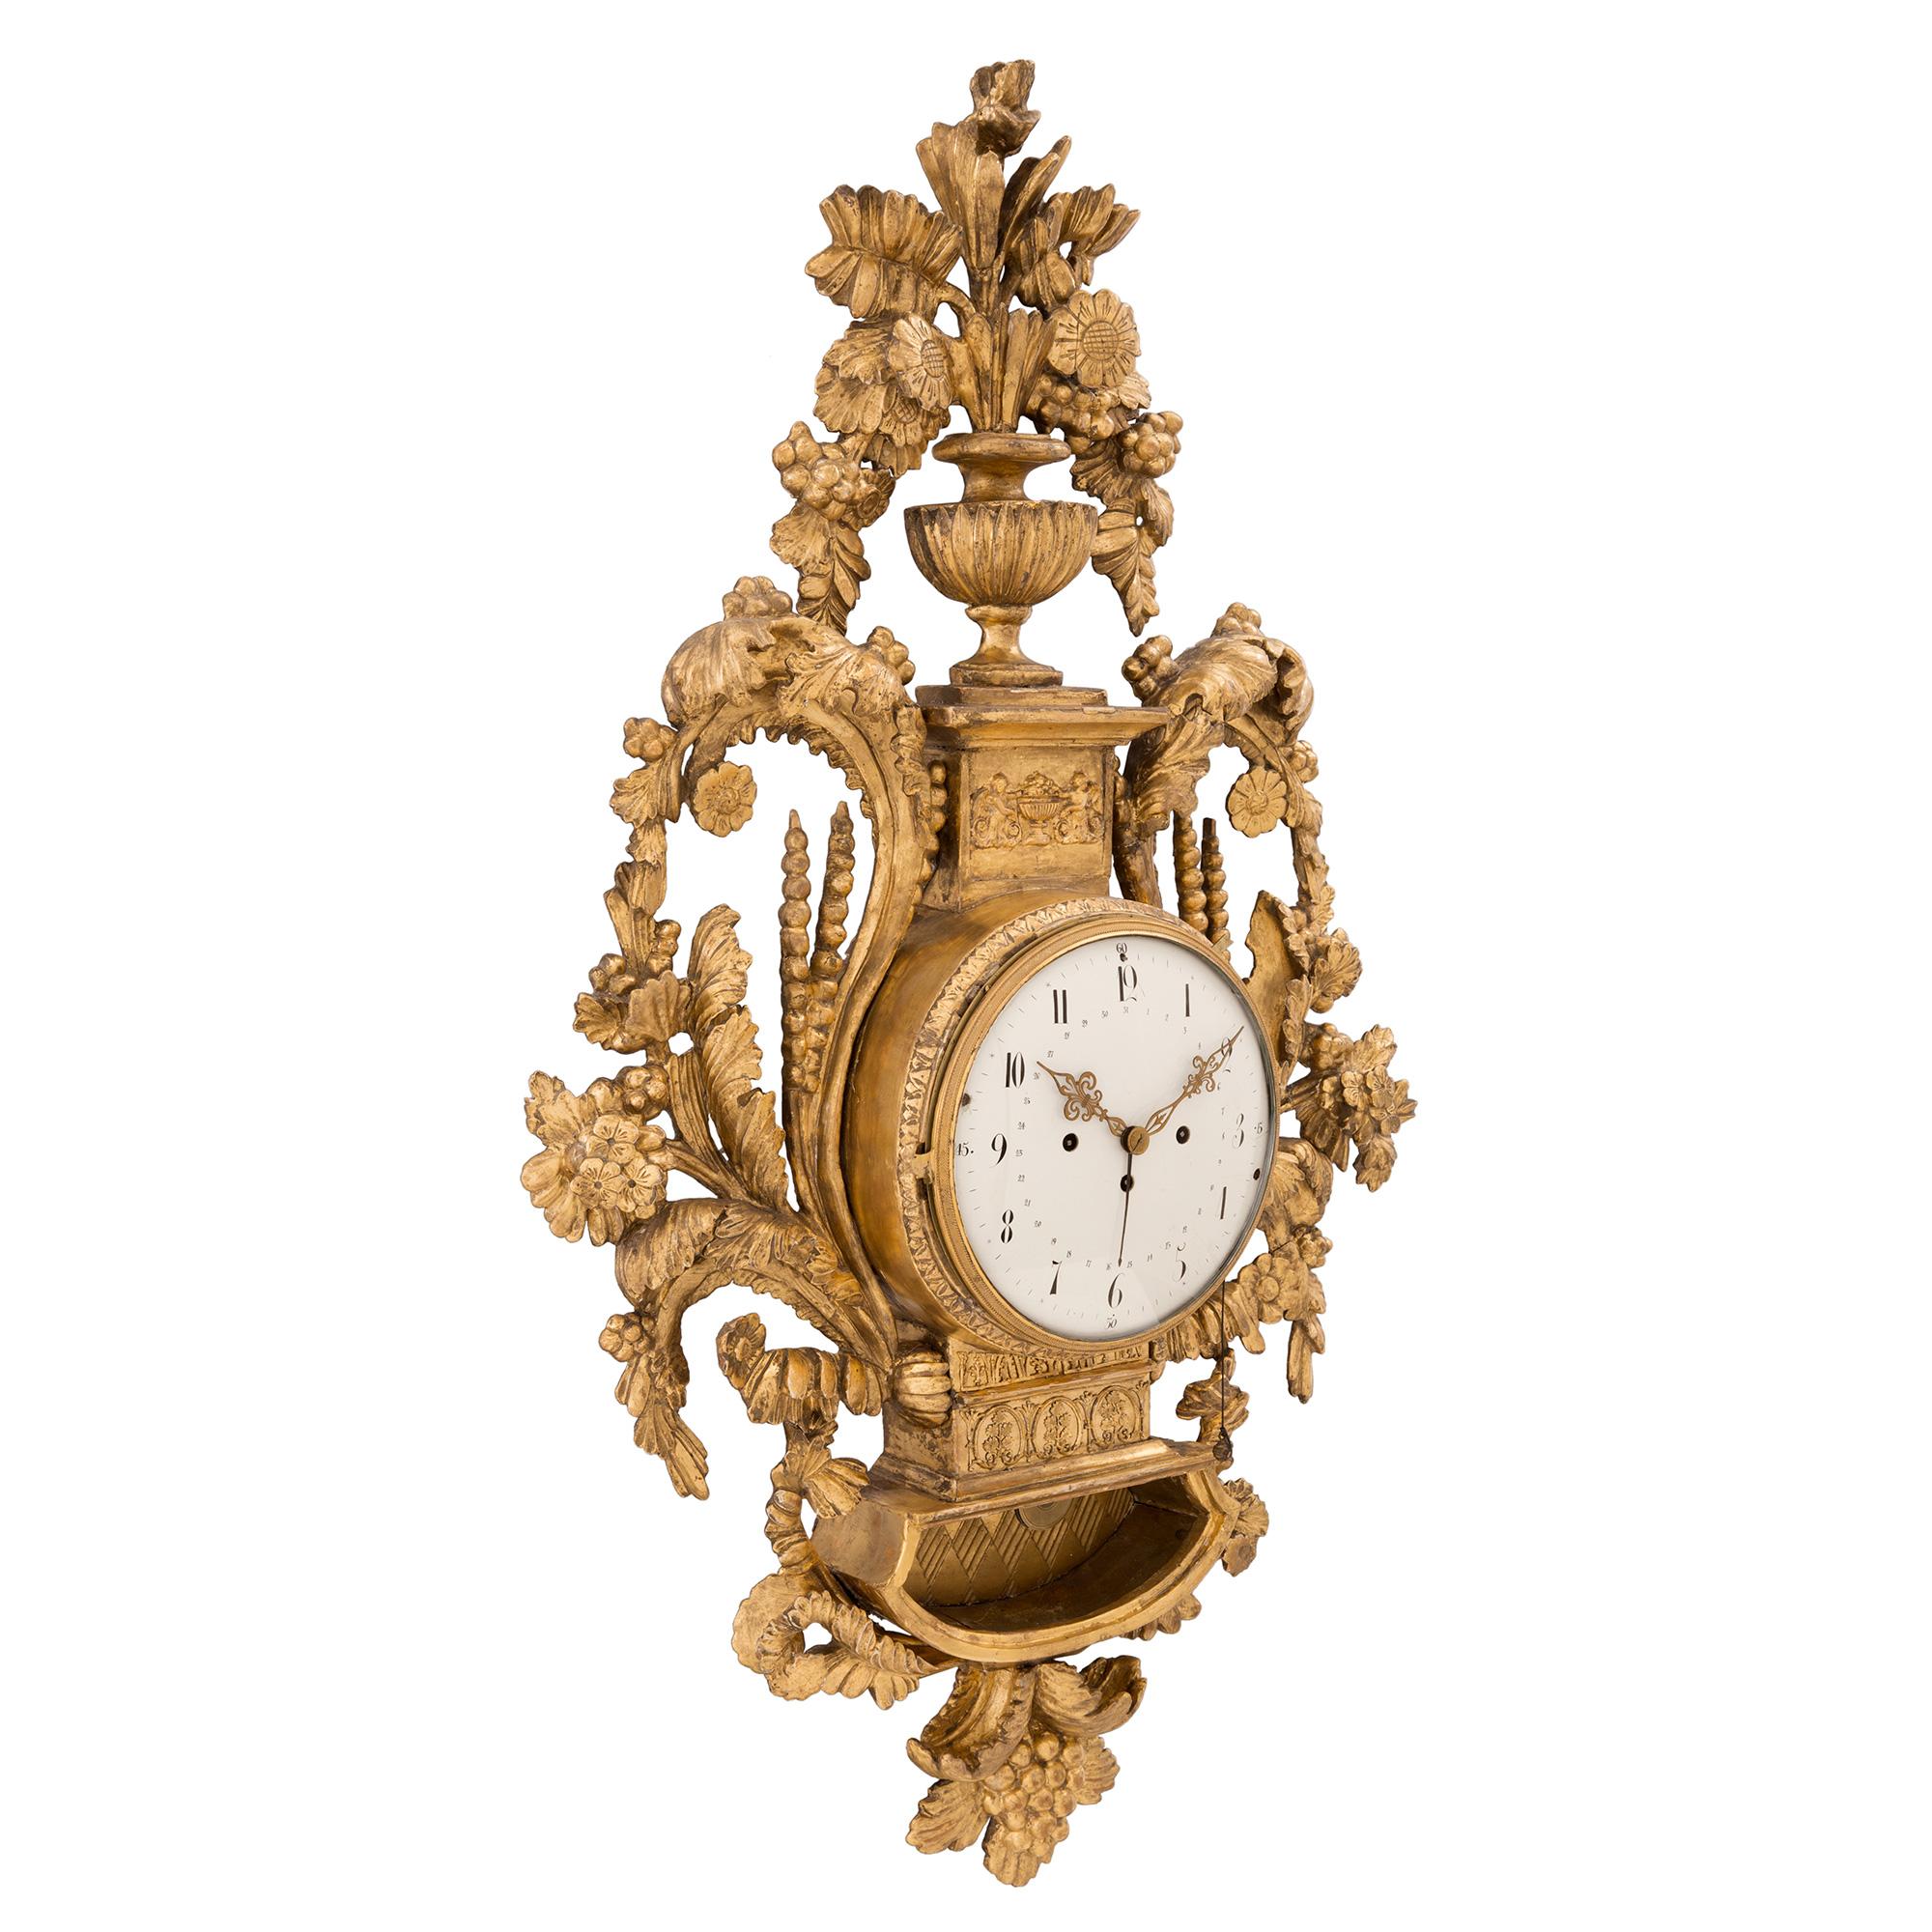 A sensational and extremely high quality Austrian 18th century Louis XVI period giltwood cartel blind man's clock, circa 1740. The clock displays a most exquisitely carved case with intricately detailed scrolled designs, wheat sprigs and stunning